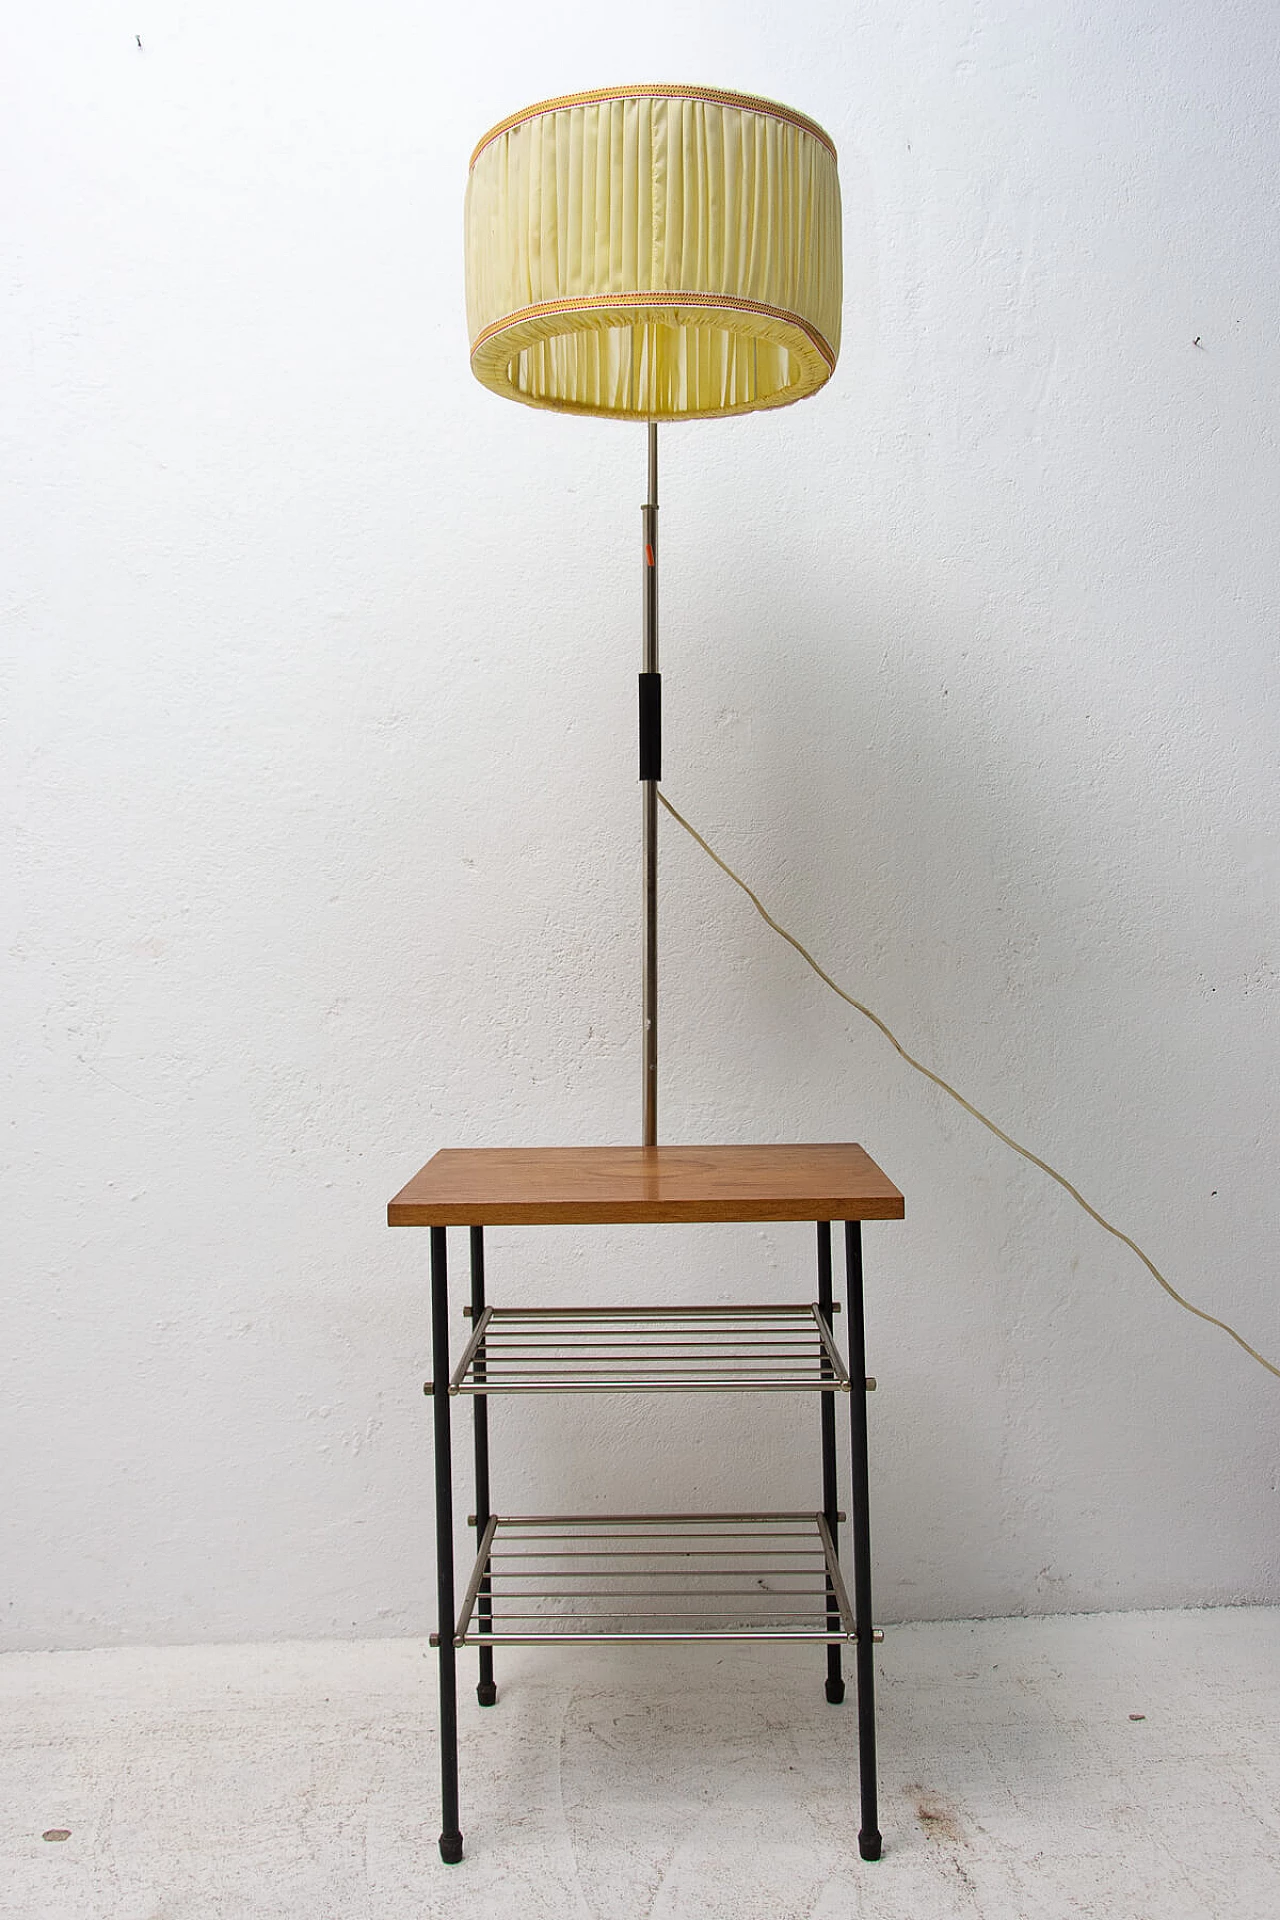 Floor lamp with storage compartment, 1970s 1364361